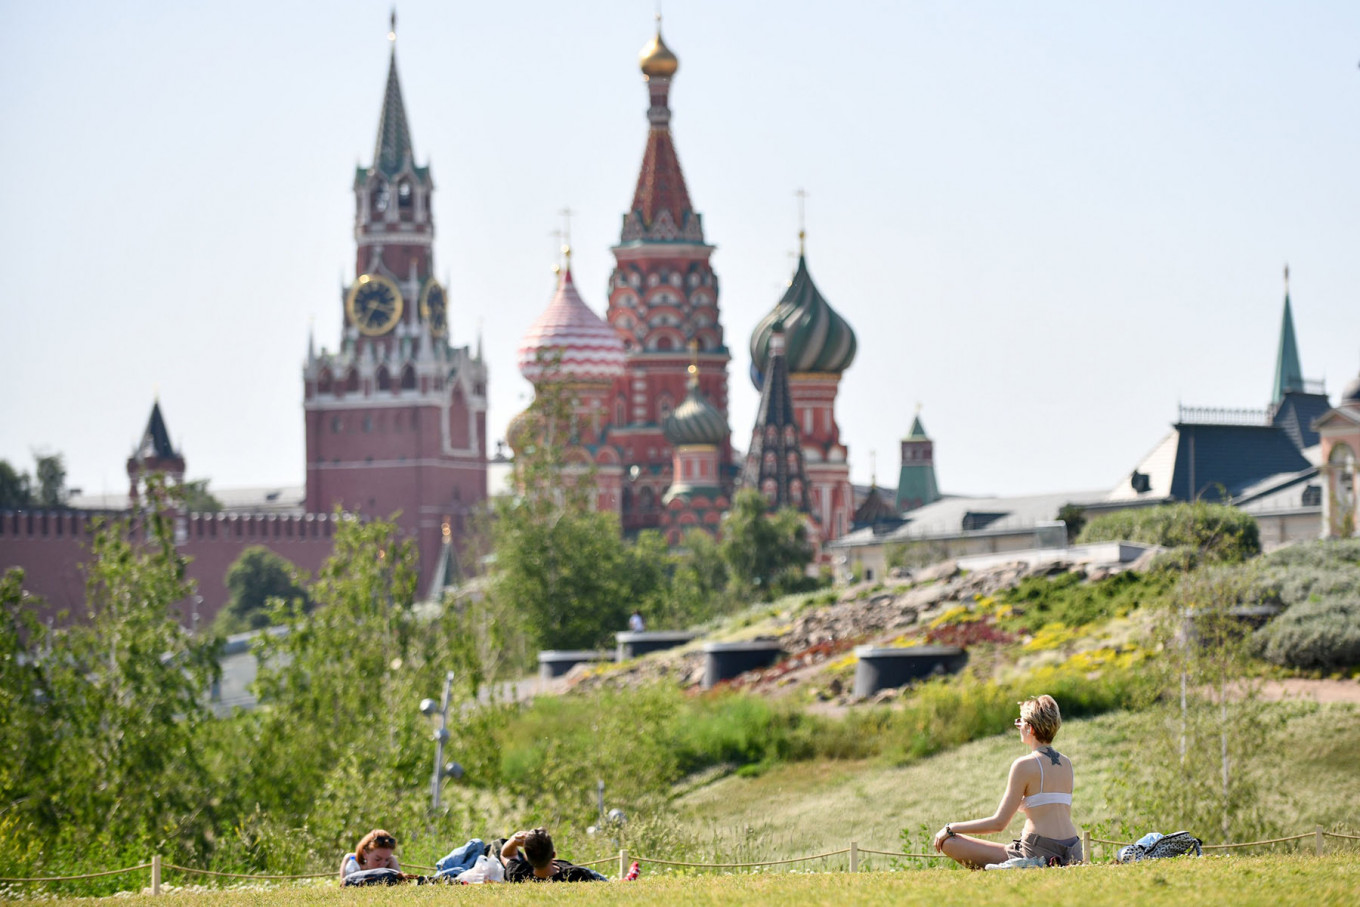 Moscow Sizzles in Record Temperatures - The Moscow Times